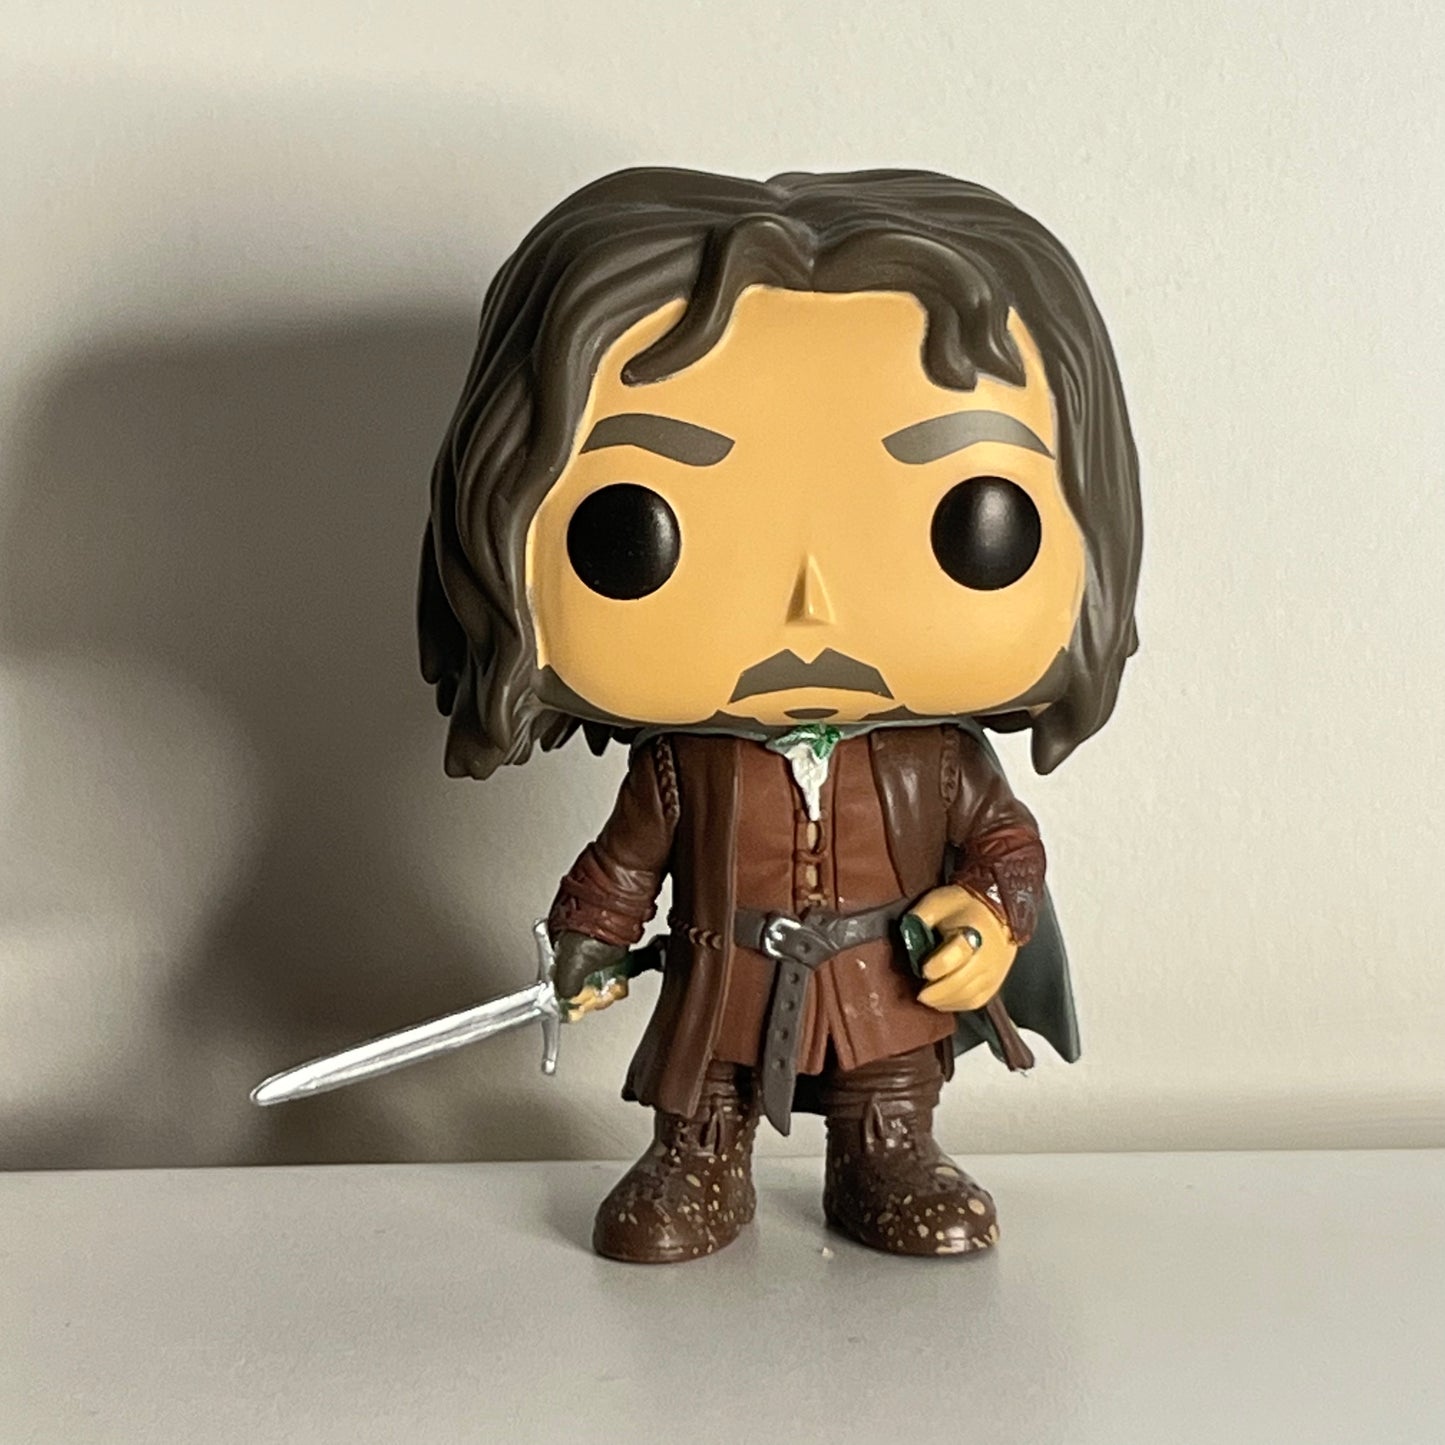 The Lord of the Rings - Aragorn 531 Funko Pop (No Box or Insert Included)